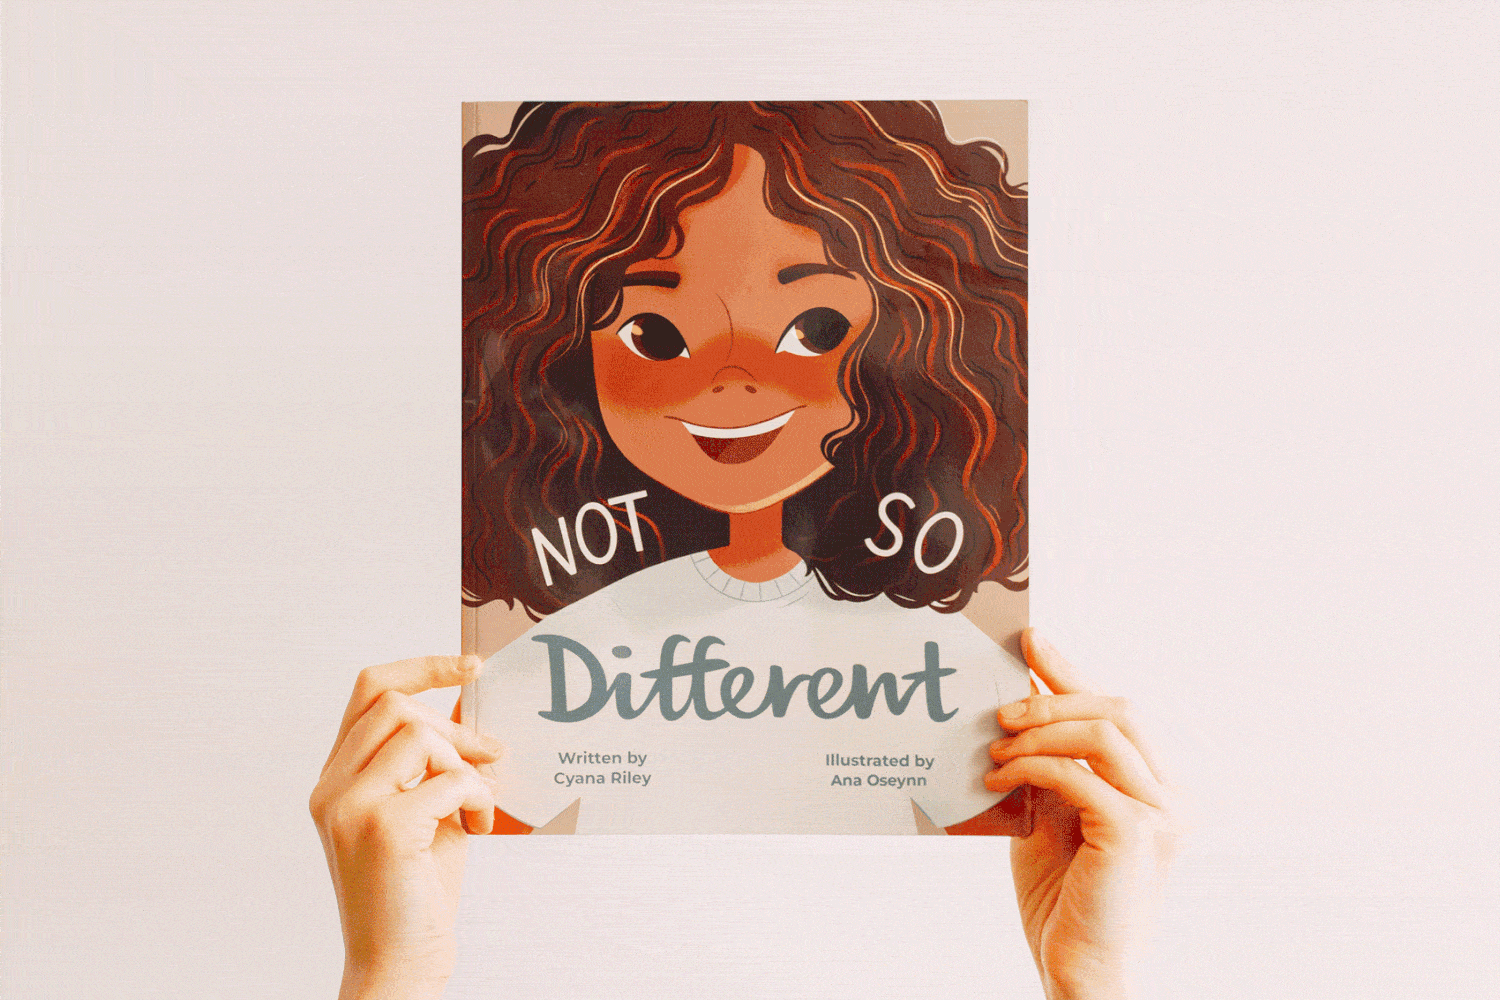 Illustrations from the children book "Not So Different"